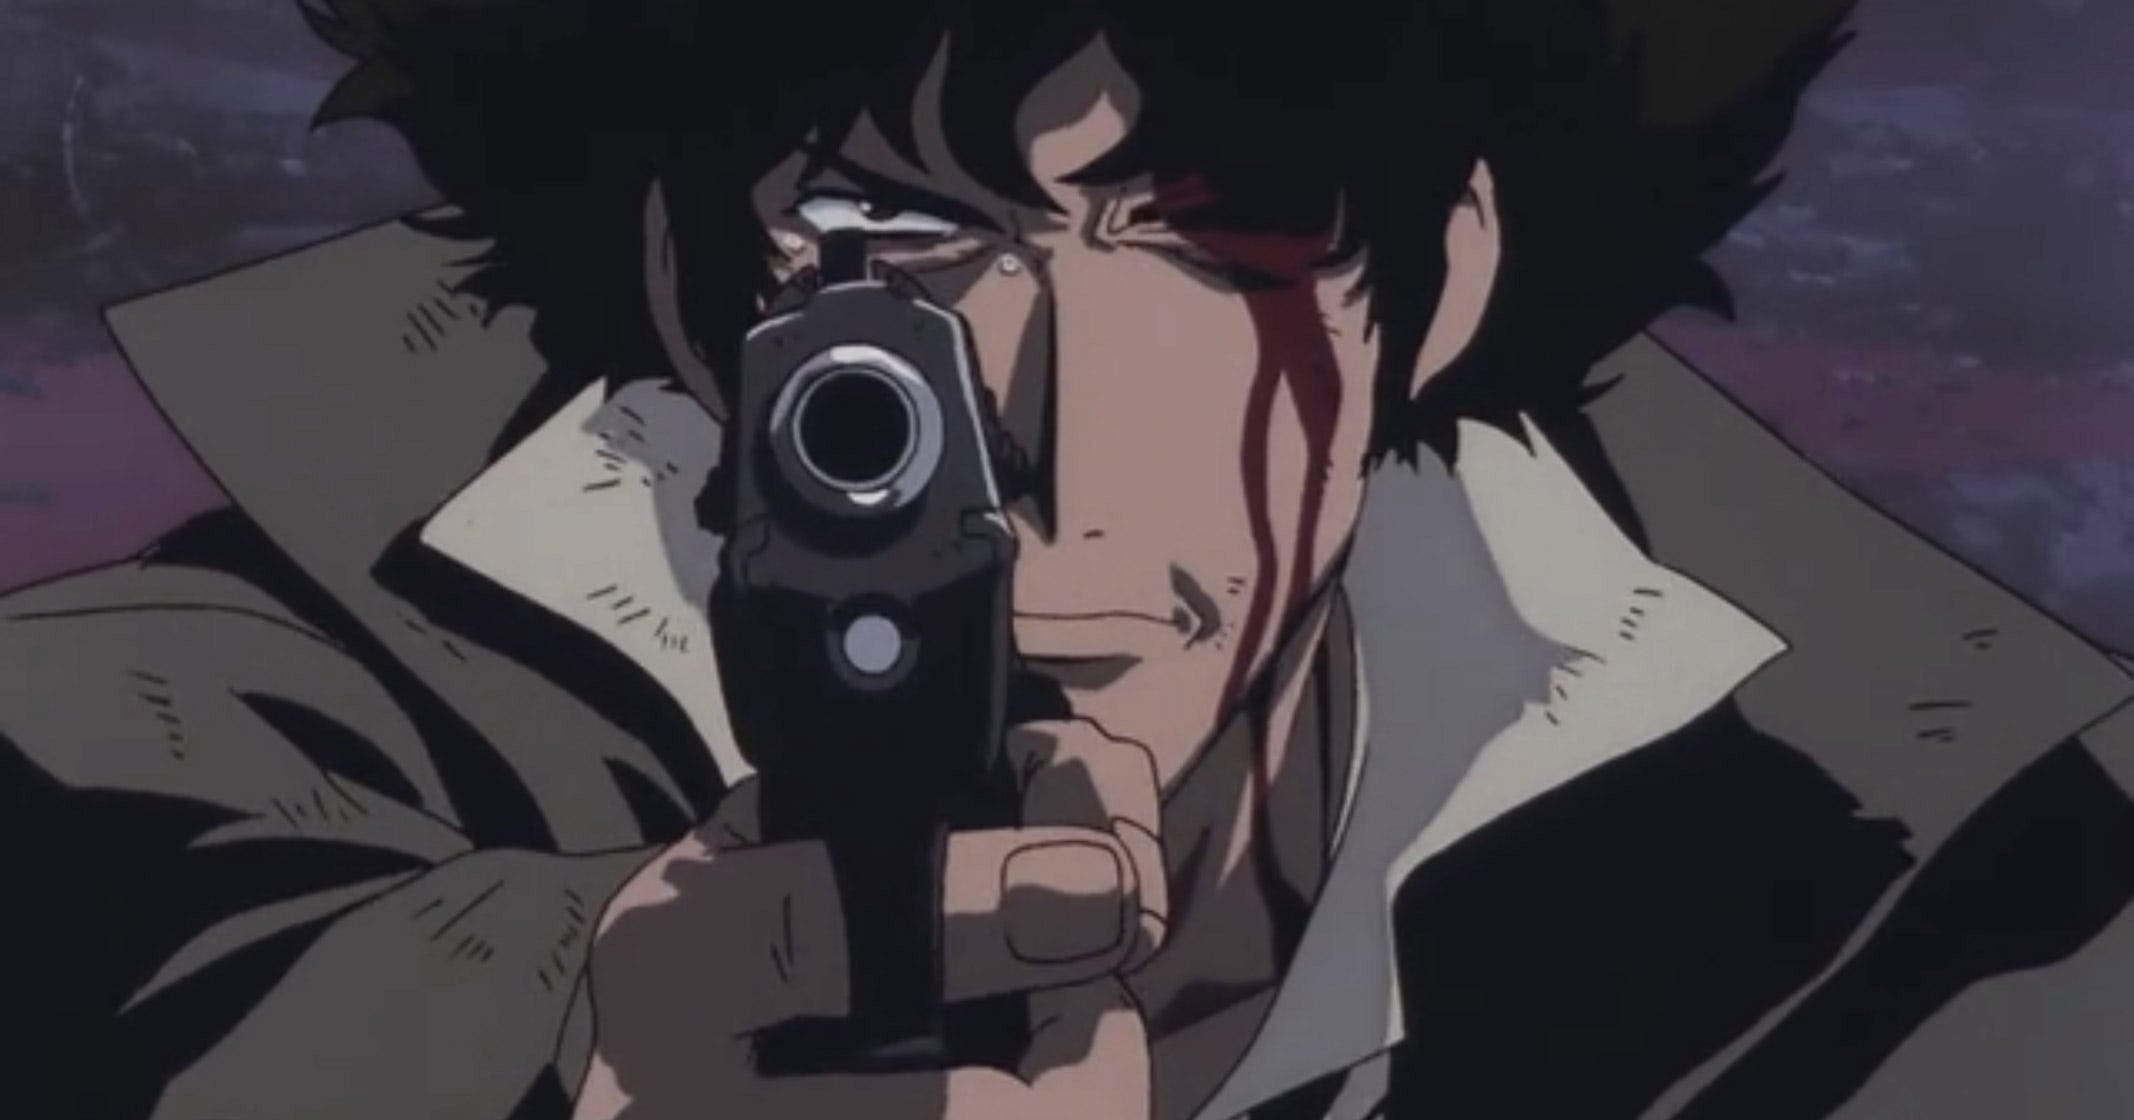 Why Spike Spiegel S Sprezzatura Spun Out By Eric Vilas Boas The Dot And Line Medium